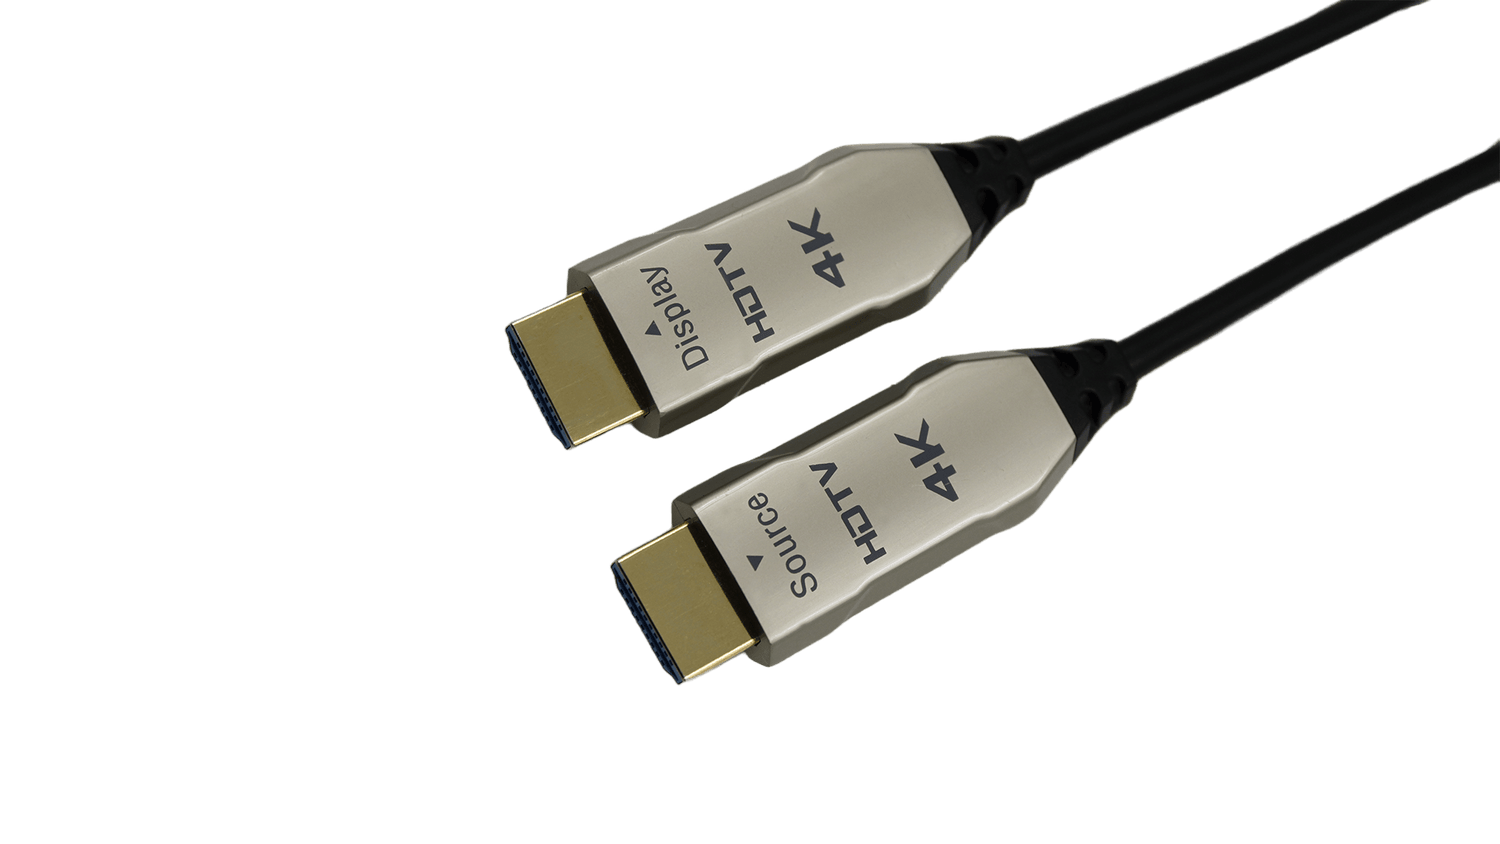 AOC HDMI Cable with 18Gb/s High Speed Transfer - EmbedTech